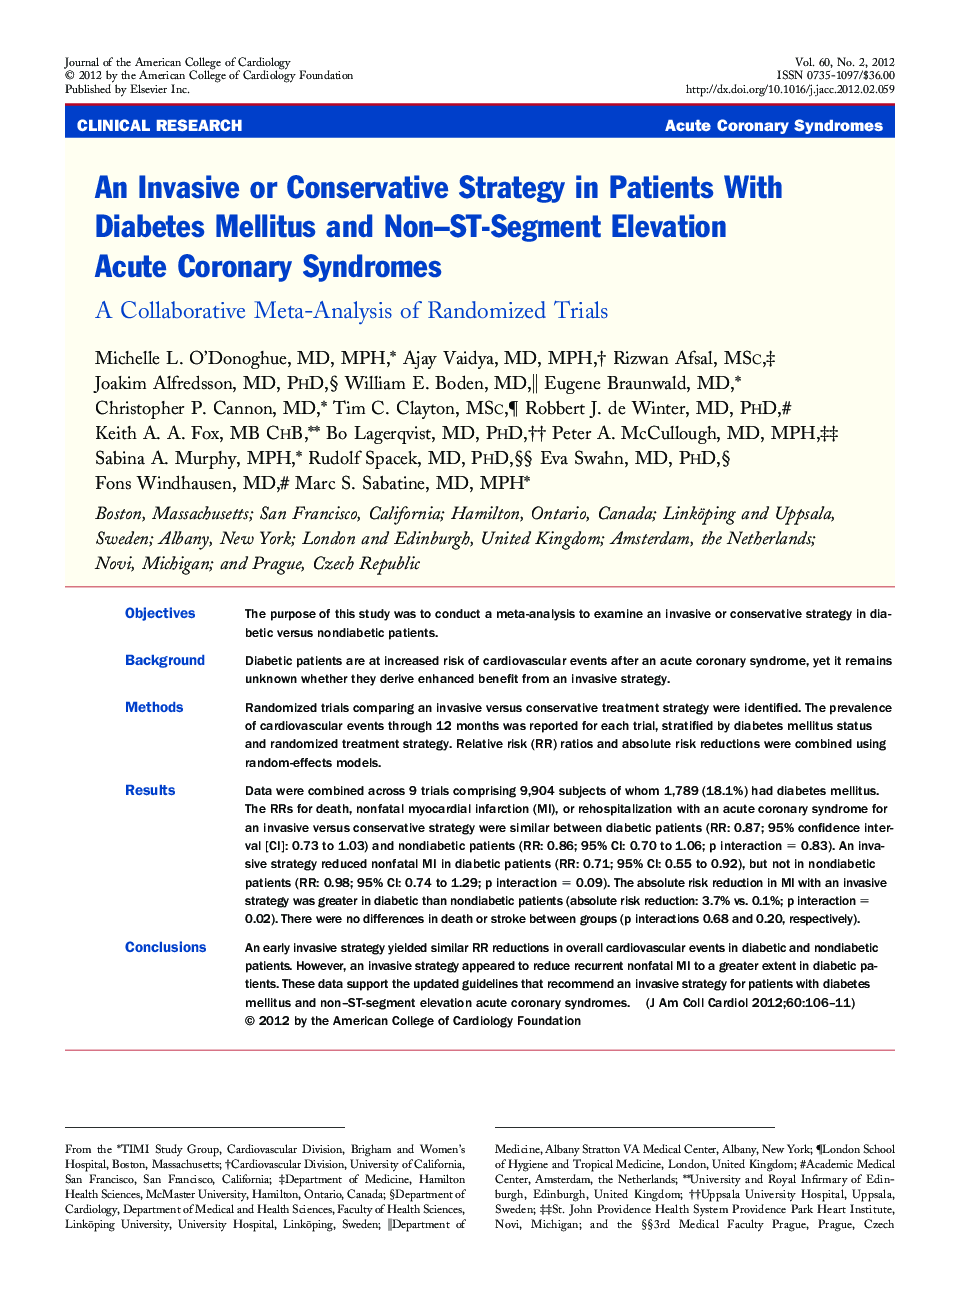 An Invasive or Conservative Strategy in Patients With Diabetes Mellitus and Non–ST-Segment Elevation Acute Coronary Syndromes : A Collaborative Meta-Analysis of Randomized Trials